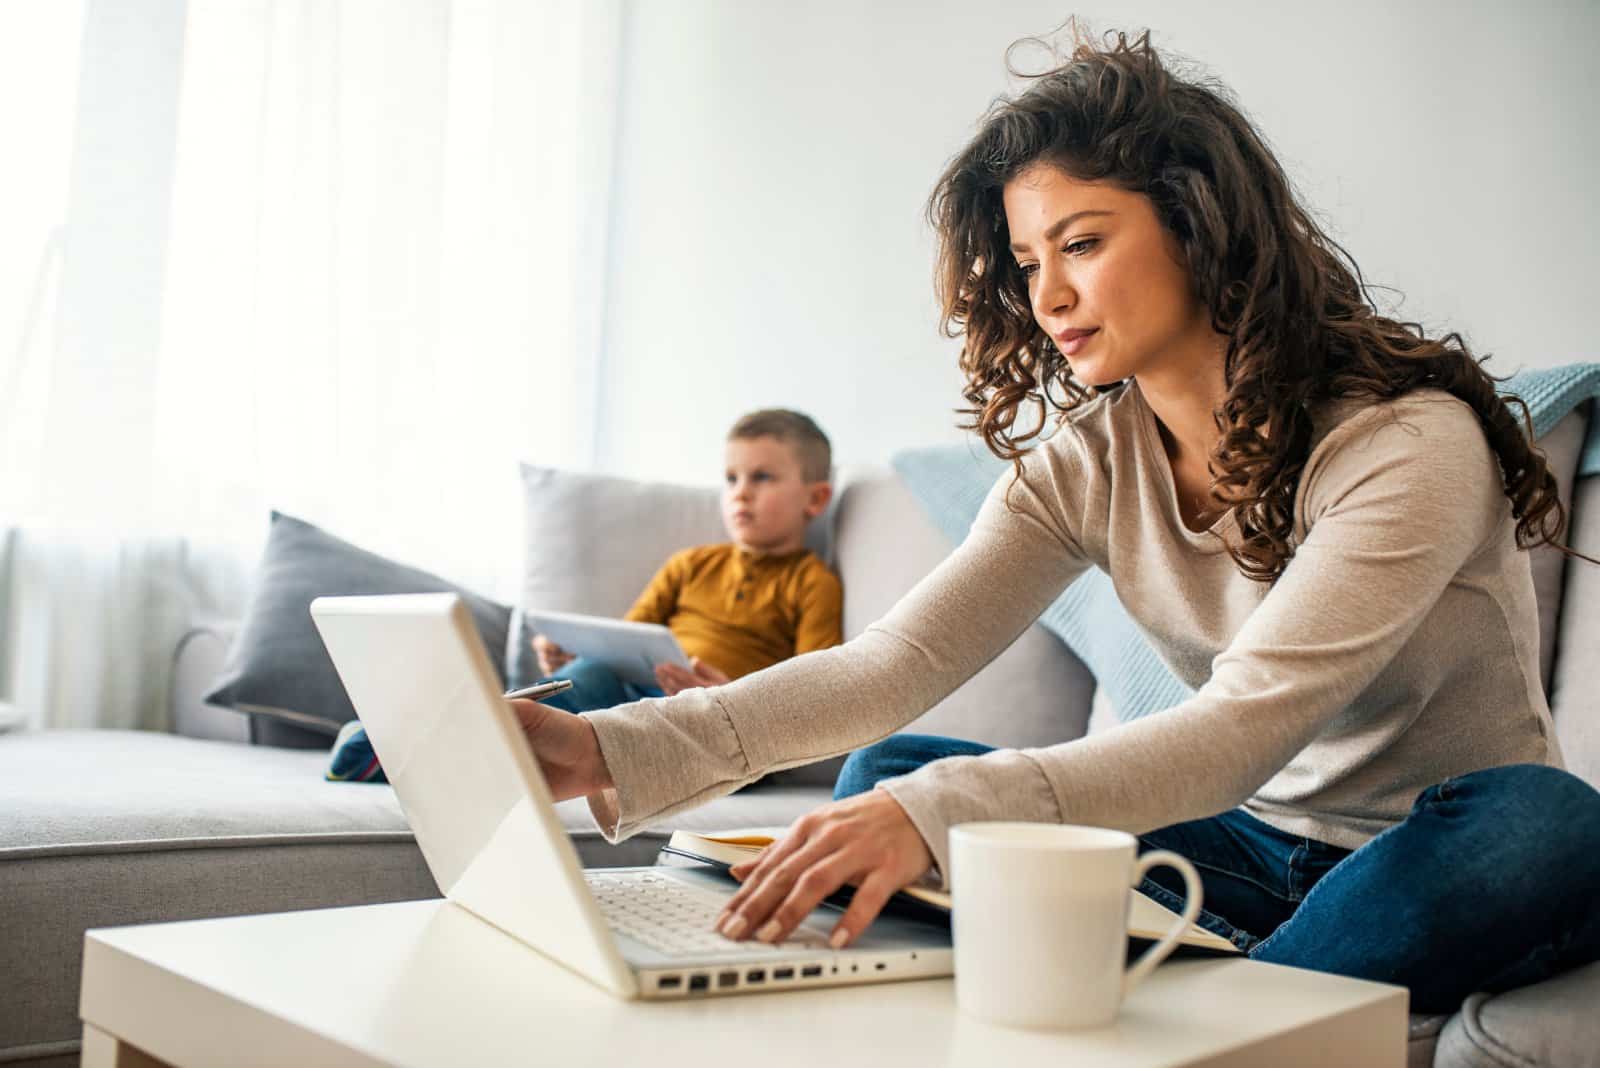 Image Credit: Shutterstock / Dragana Gordic <p>Tracking your kids with technology can make you feel all-powerful, but with great power comes great responsibility. It’s about finding the right balance between keeping them safe and stifling them. Navigate wisely, superhero parents!</p>